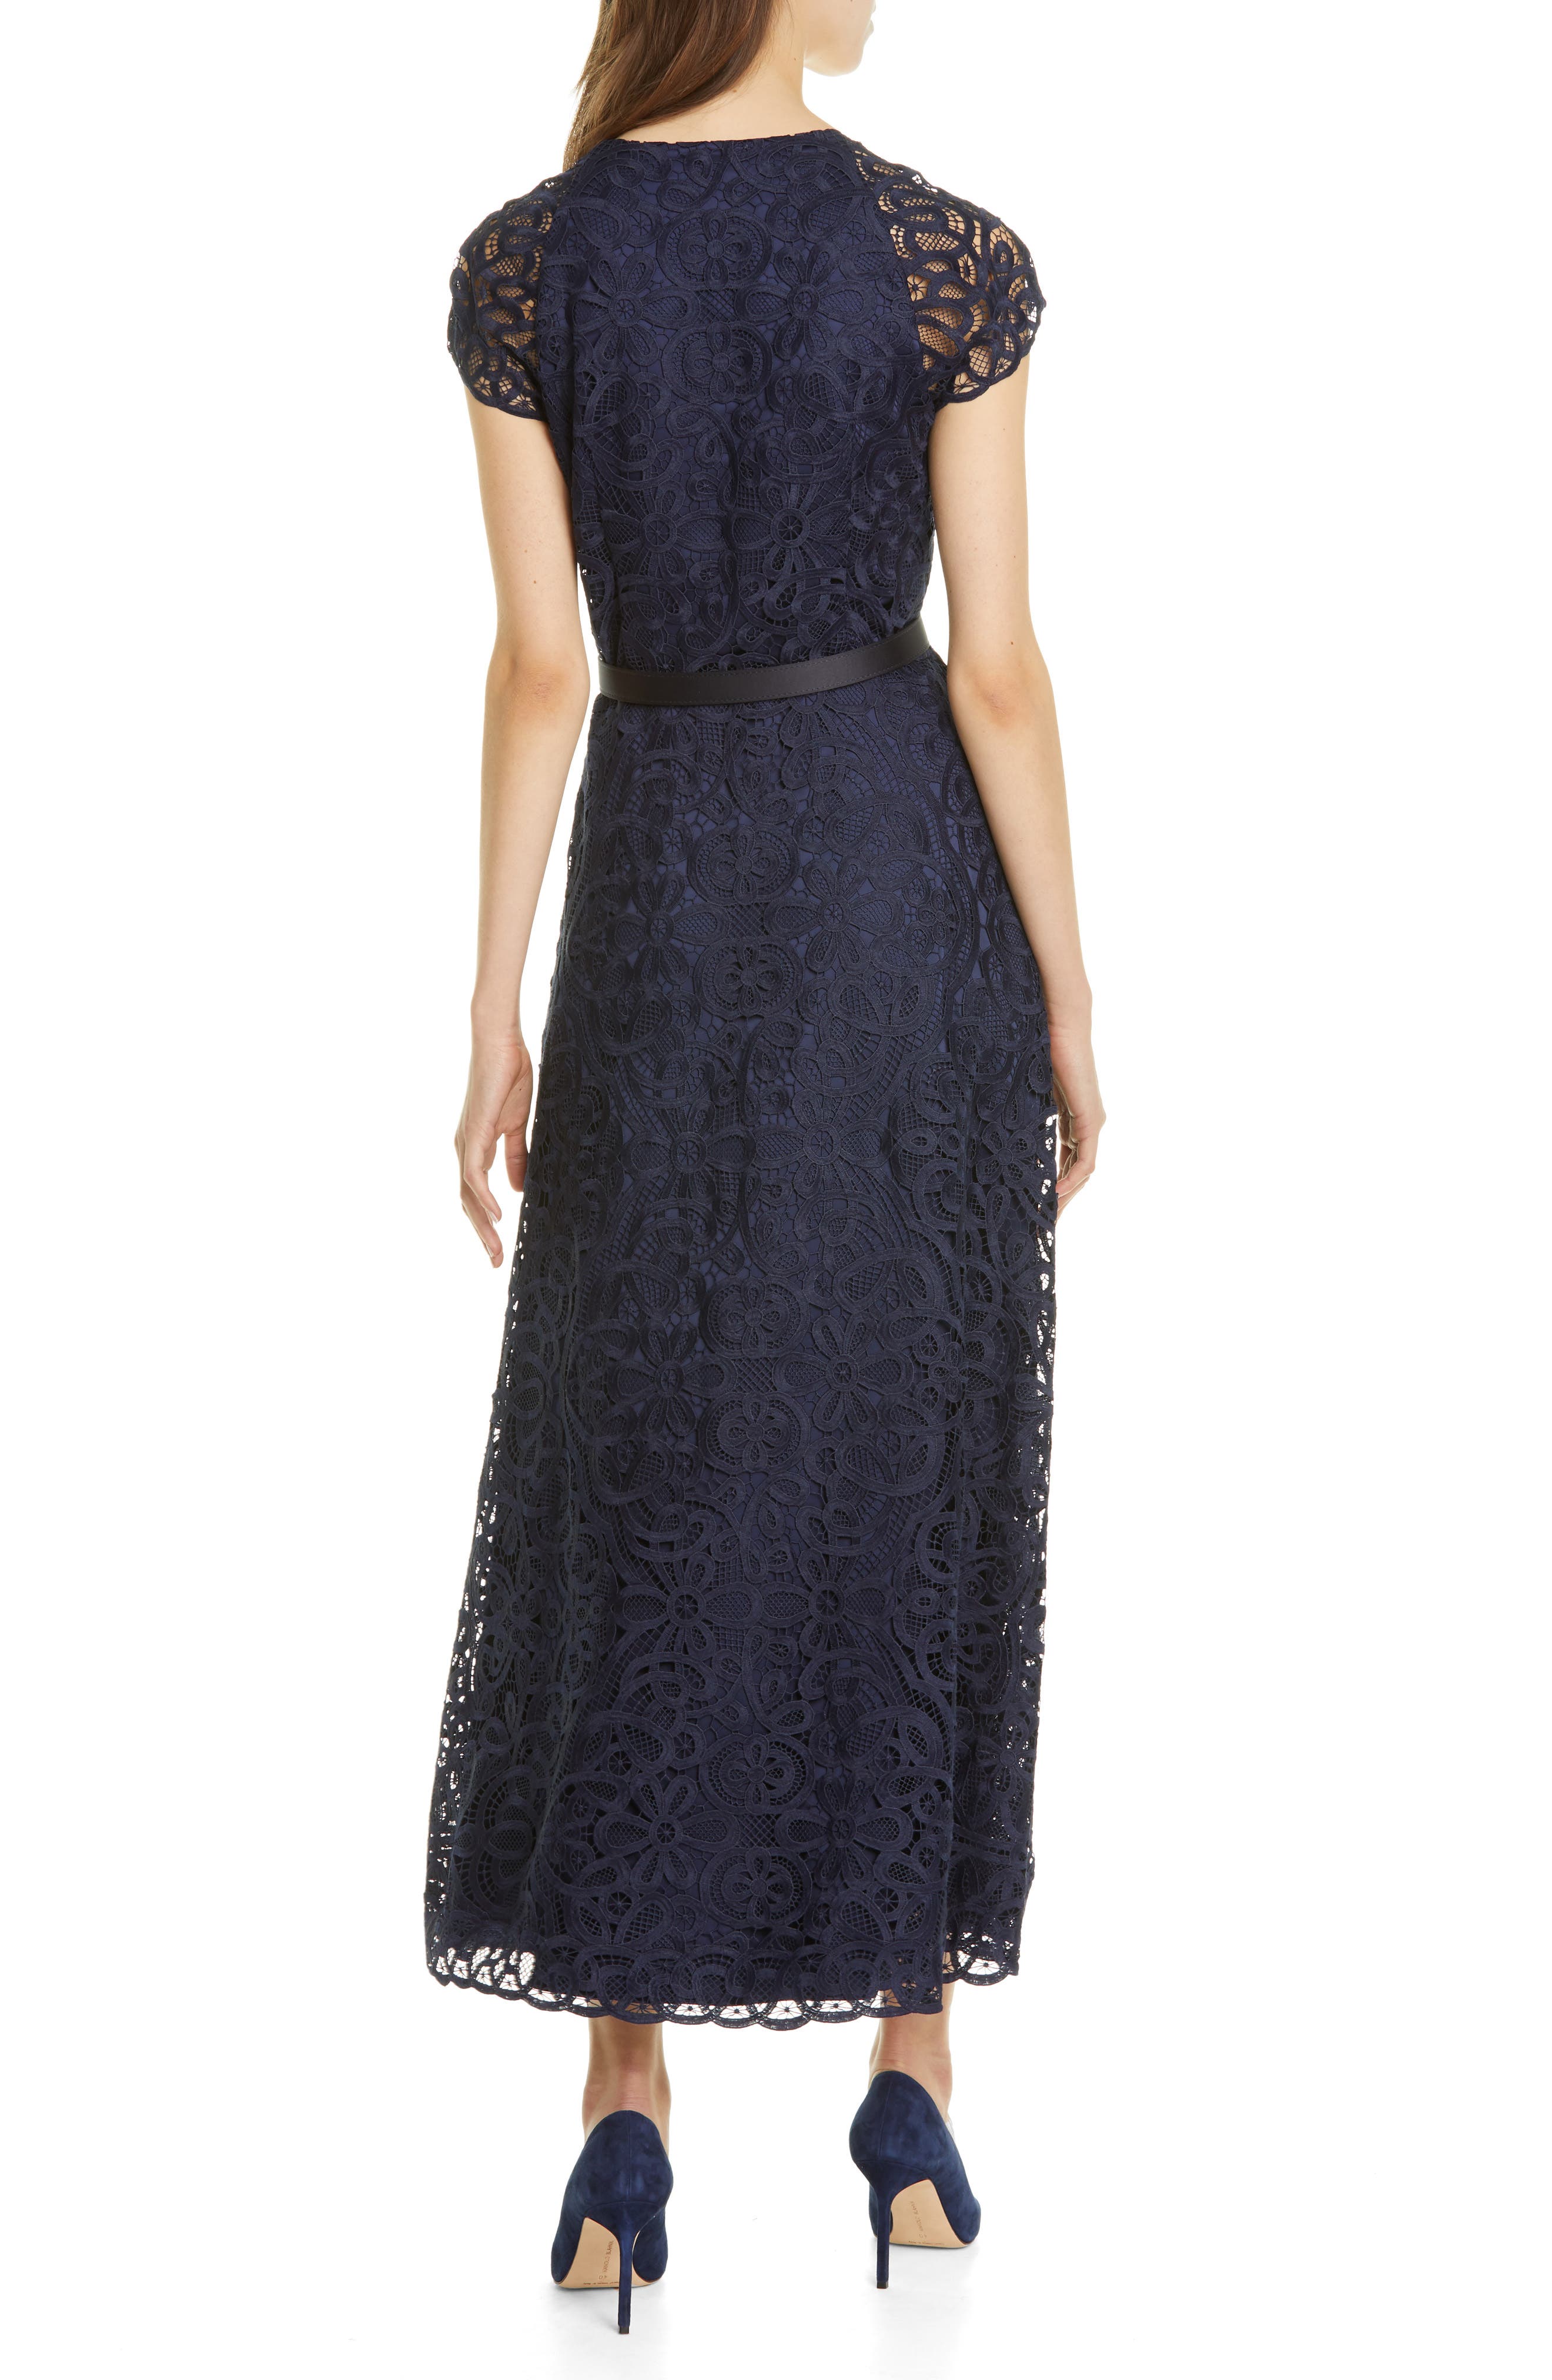 Lafayette 148 New York | Daisy Belted Lace Maxi Dress | Nordstrom Rack